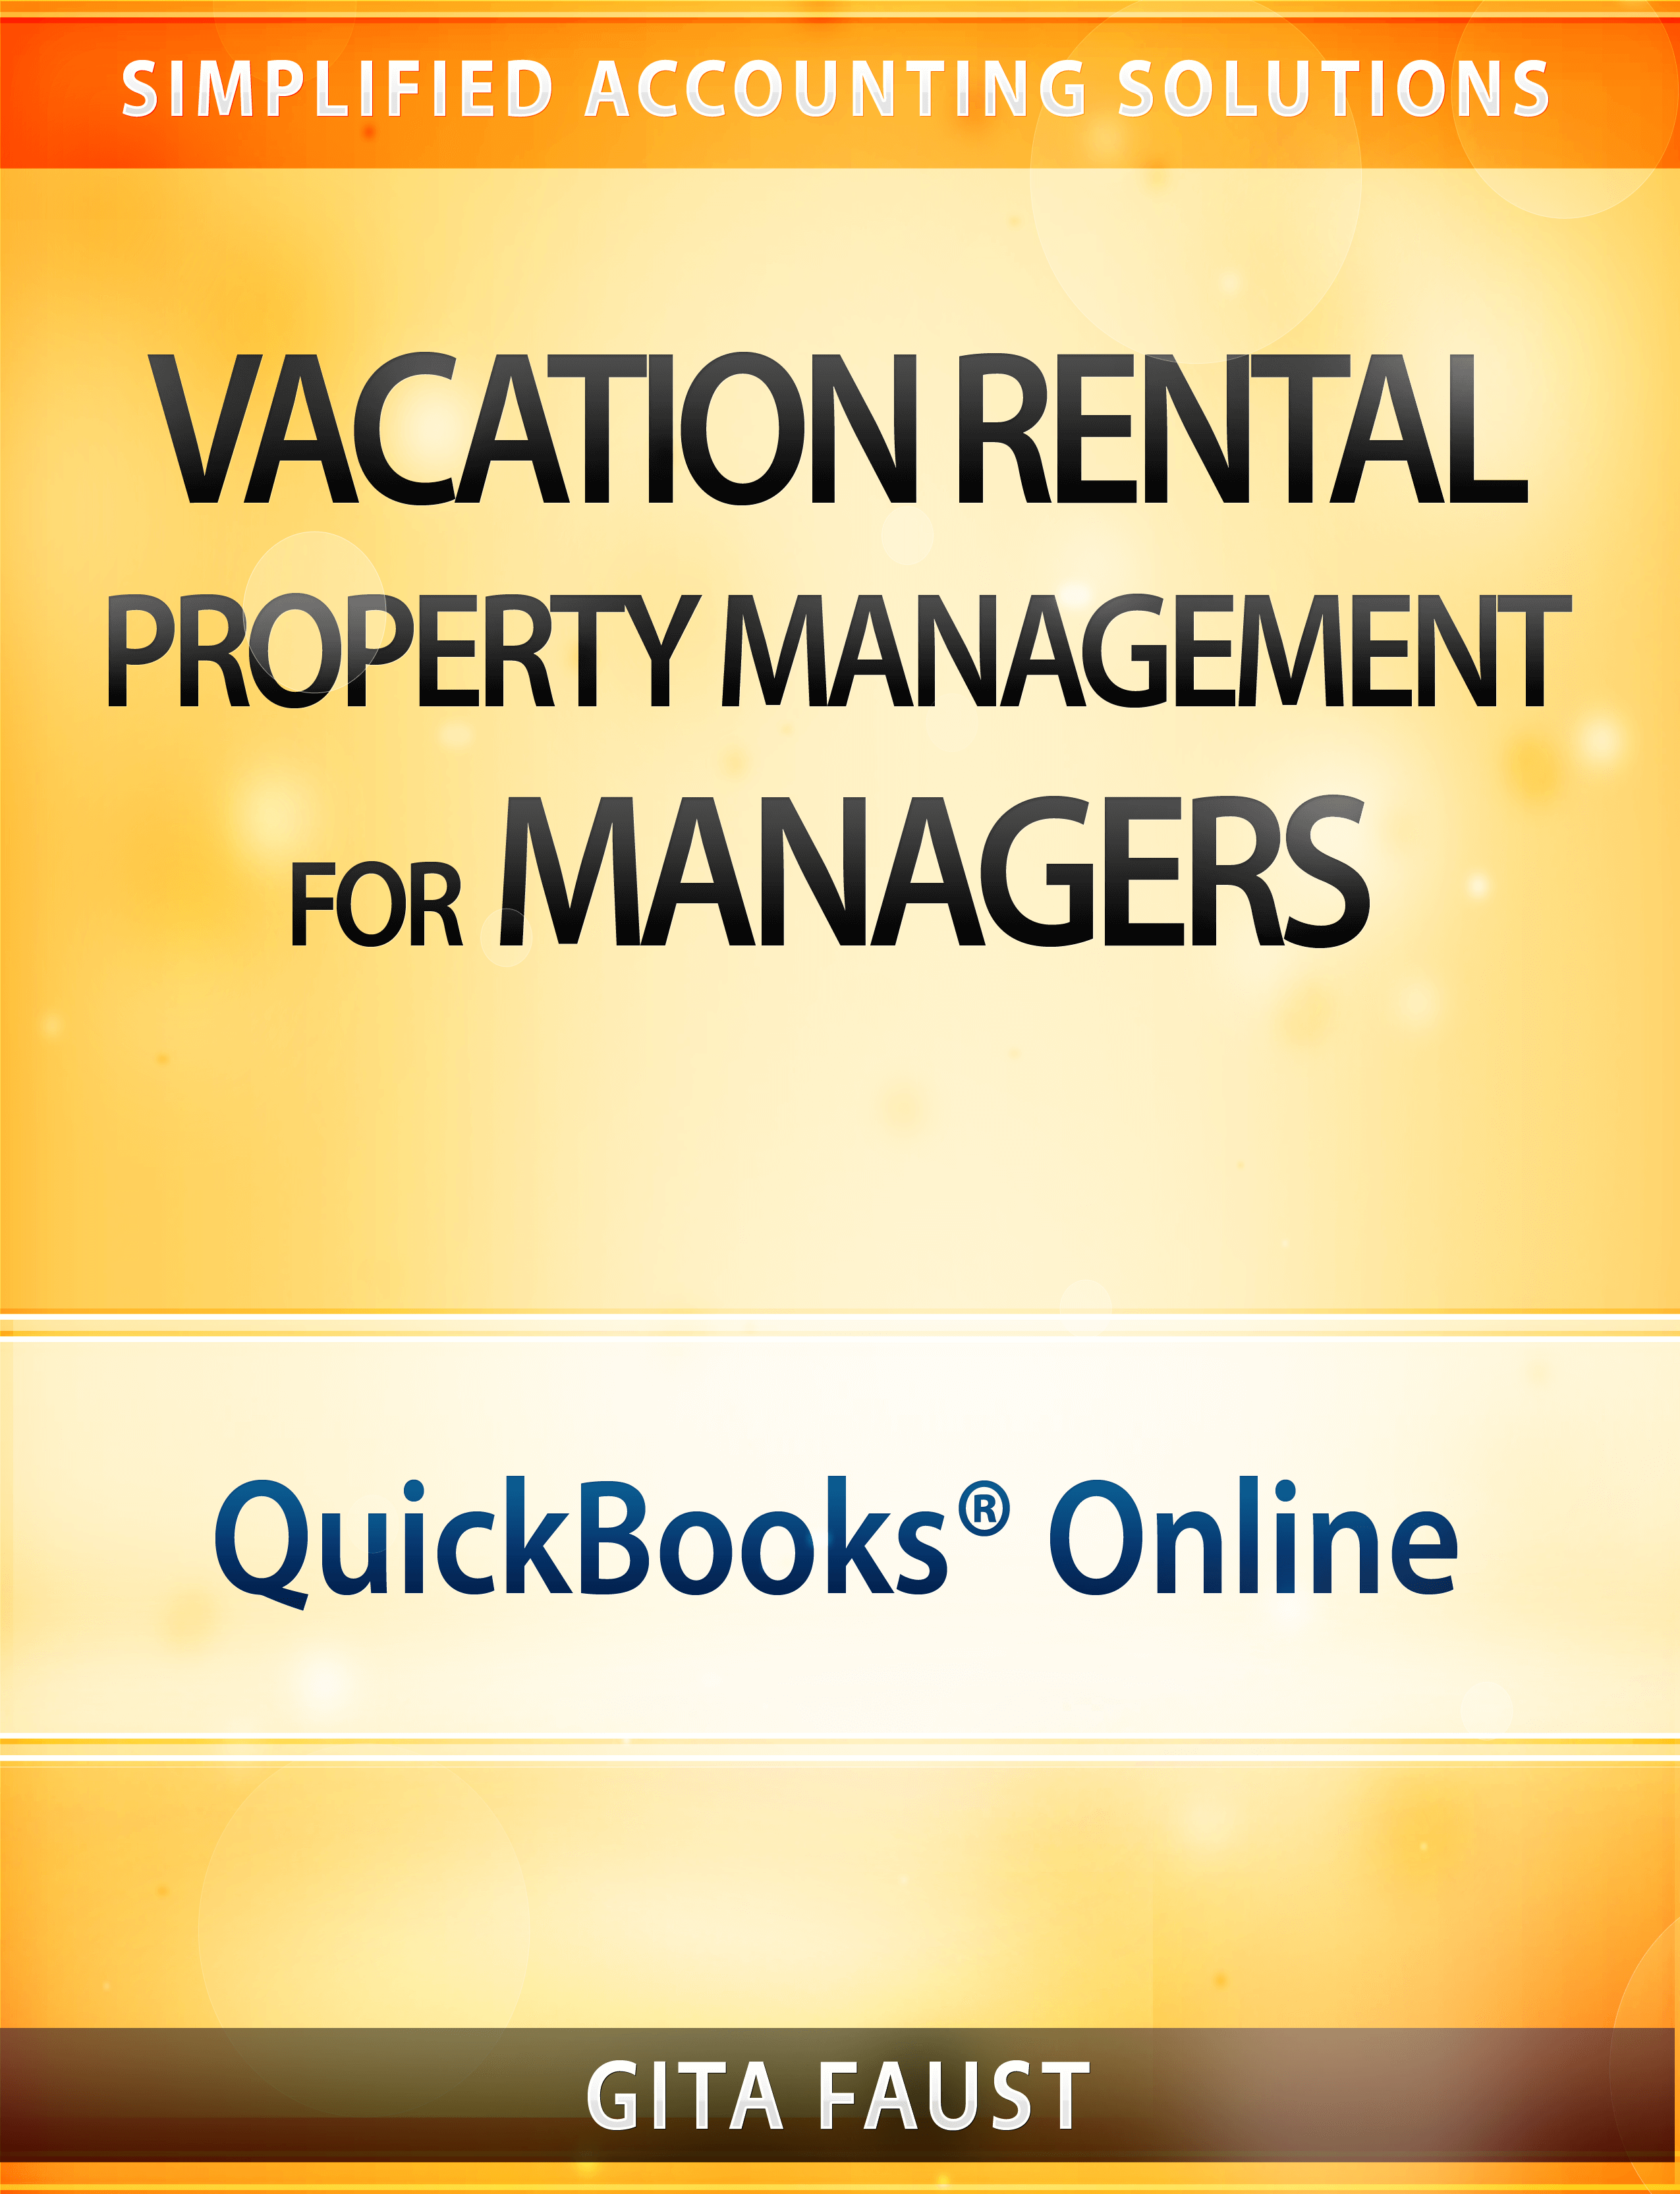 QuickBooks Online for Vacation Rental Management bookkeeping